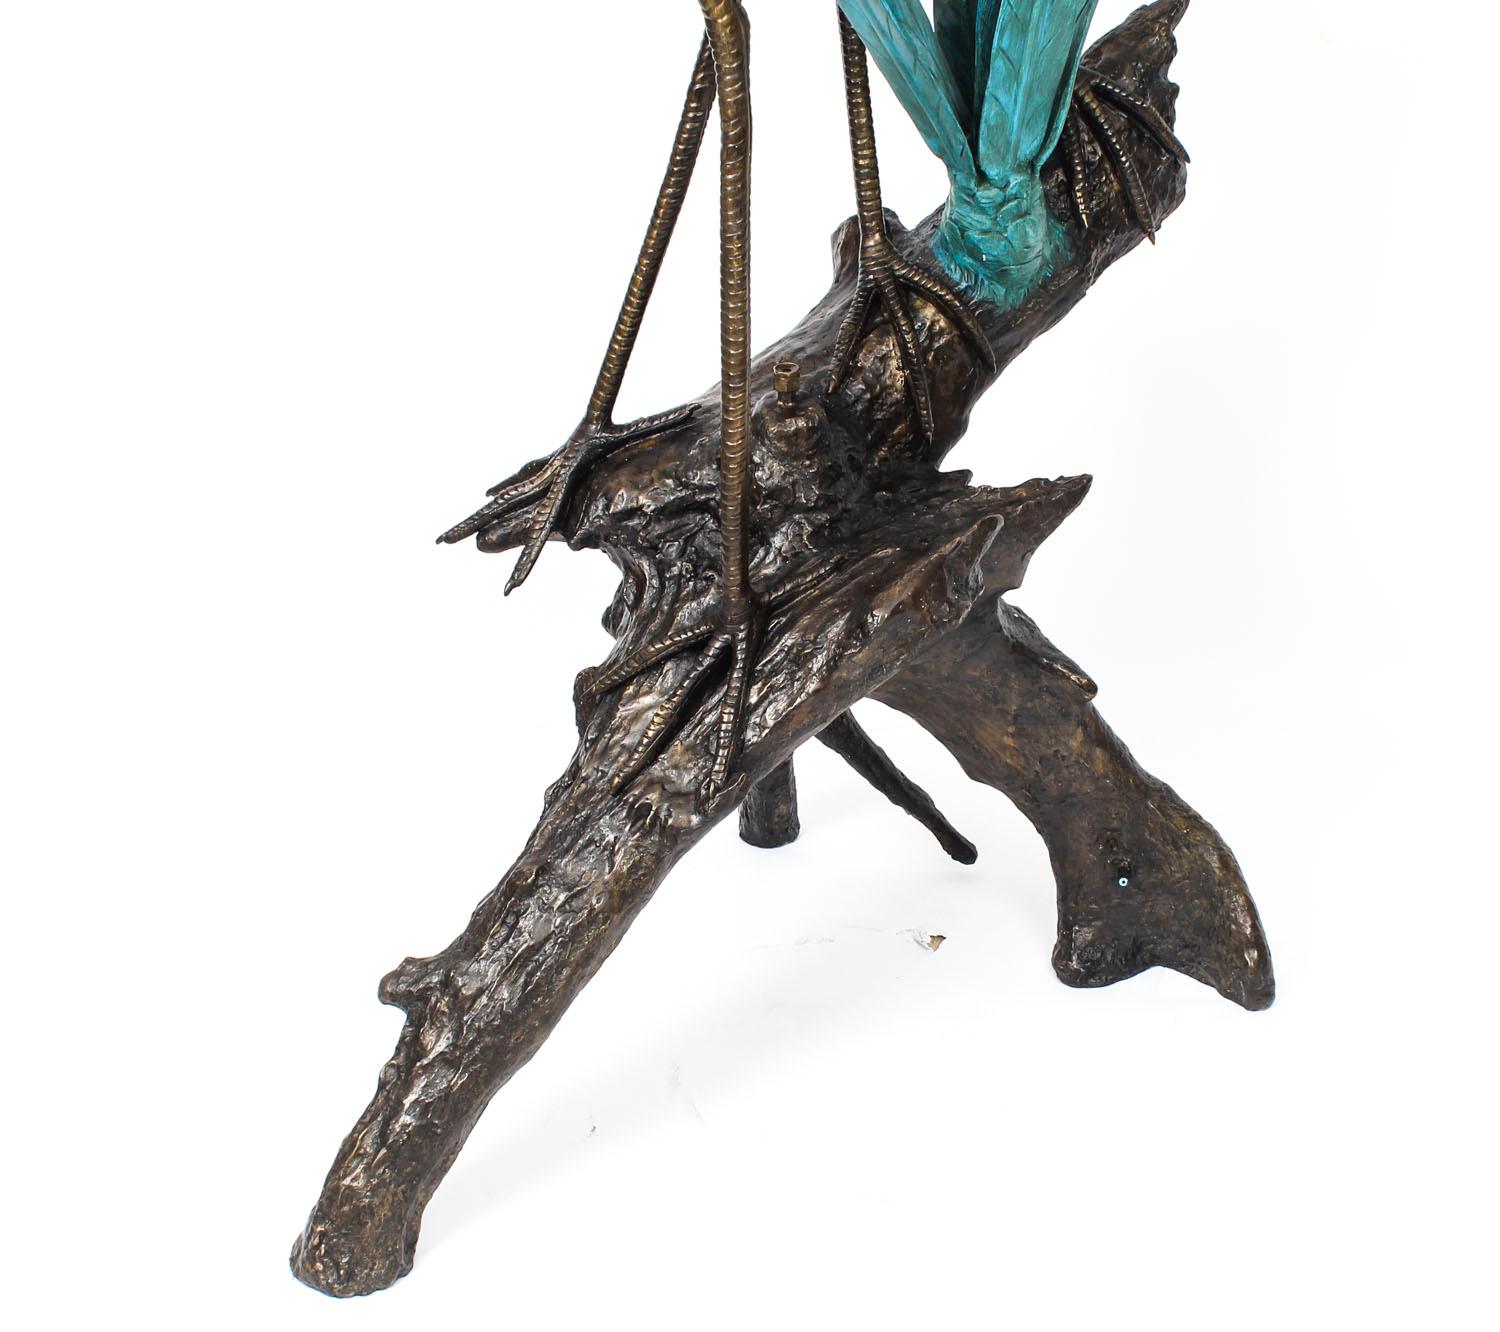 A truly stunning large vintage bronze Heron sculptural pond fountain, late 20th century in date.

This is a beautiful garden pond fountain sculpted in bronze with contrasting brown and green patina in the Victorian style, dating from the late